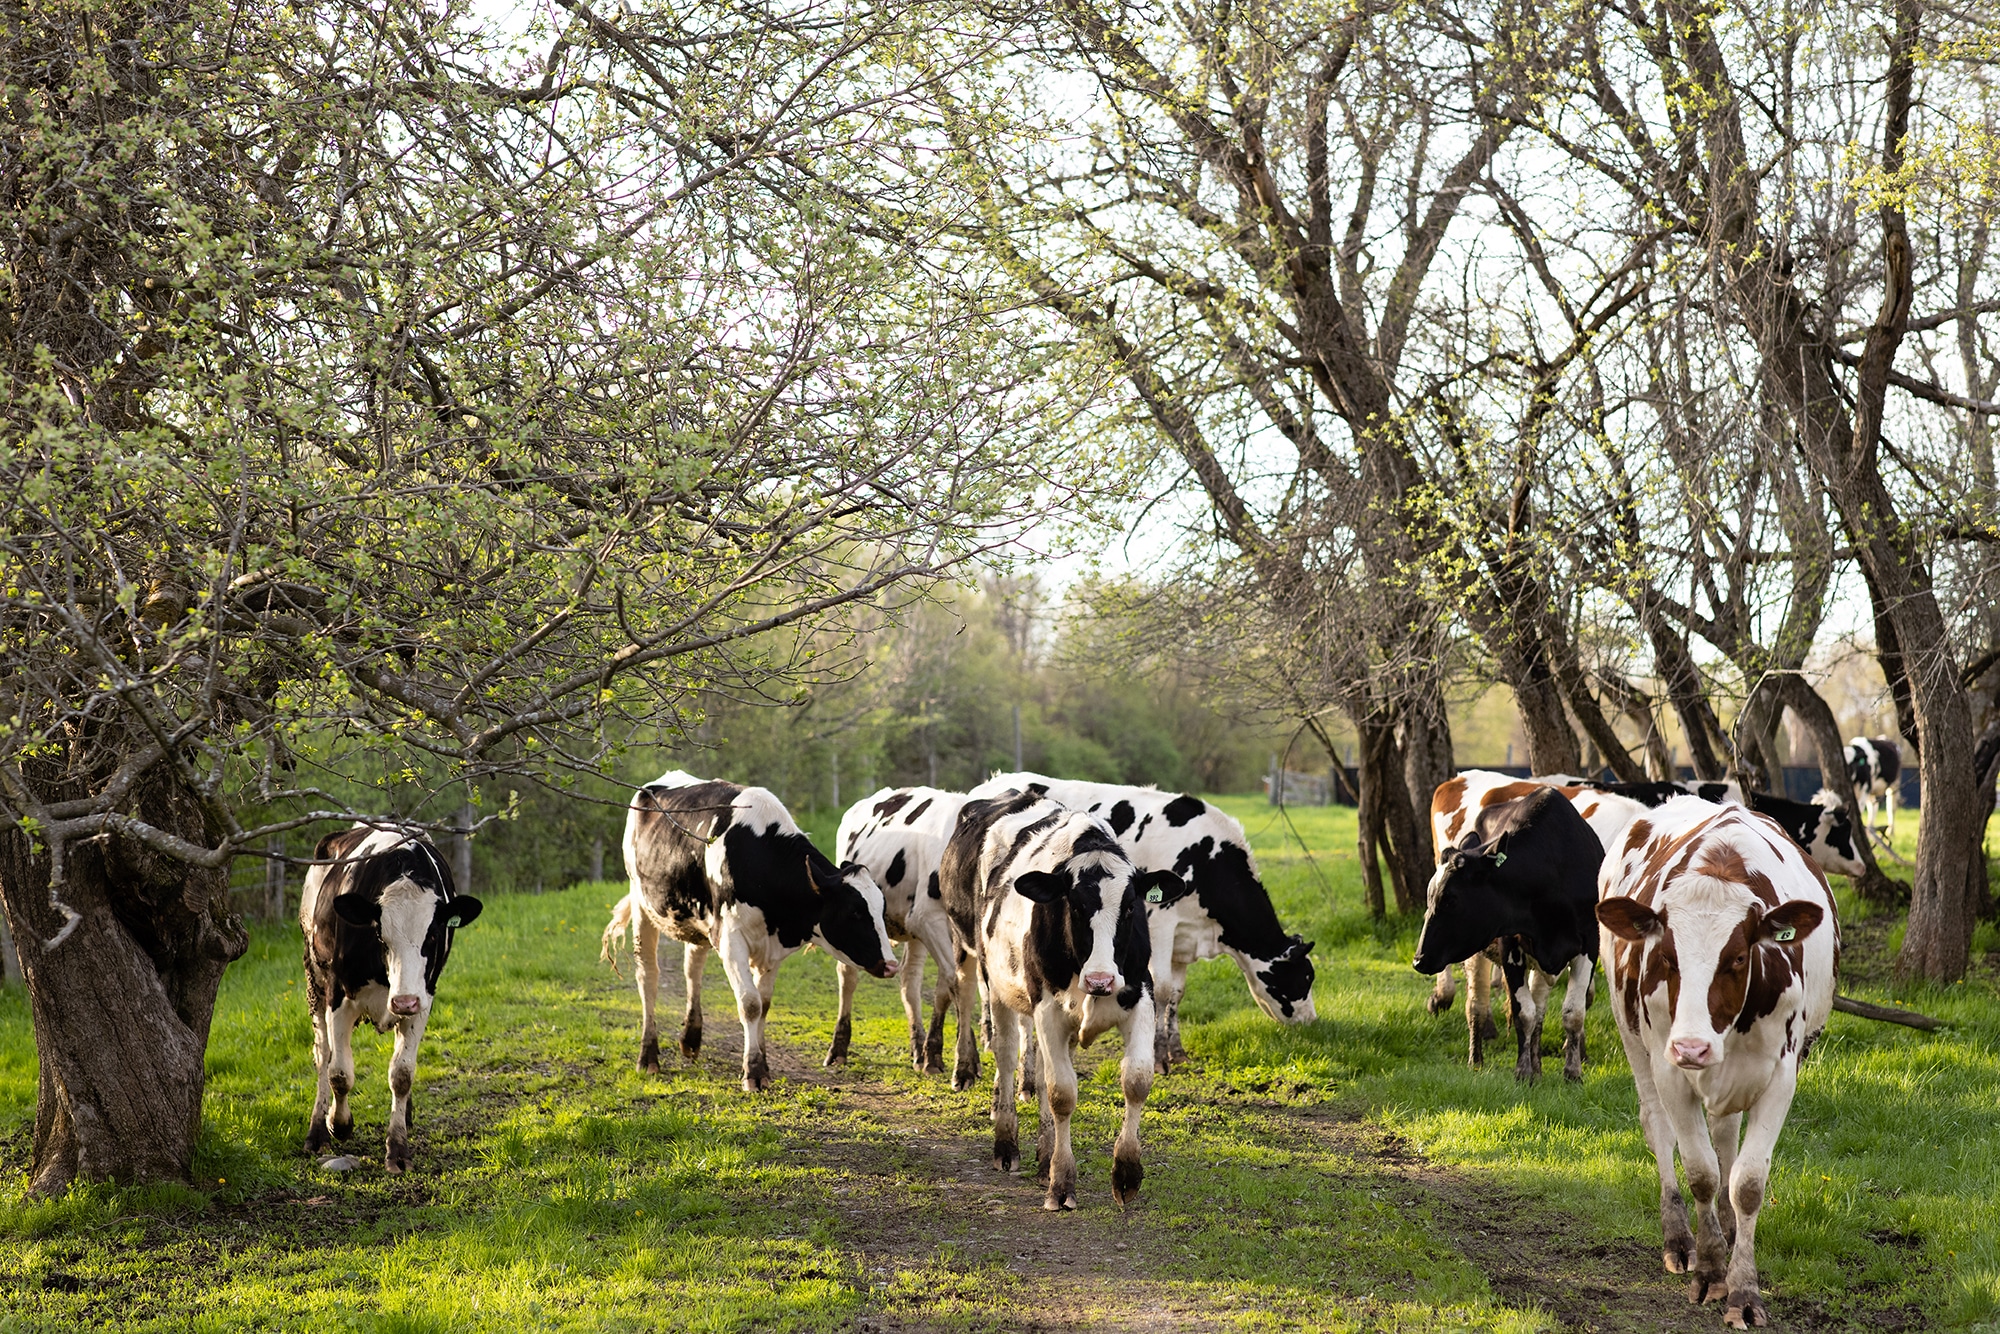 Cows grazing in a field shaded by trees